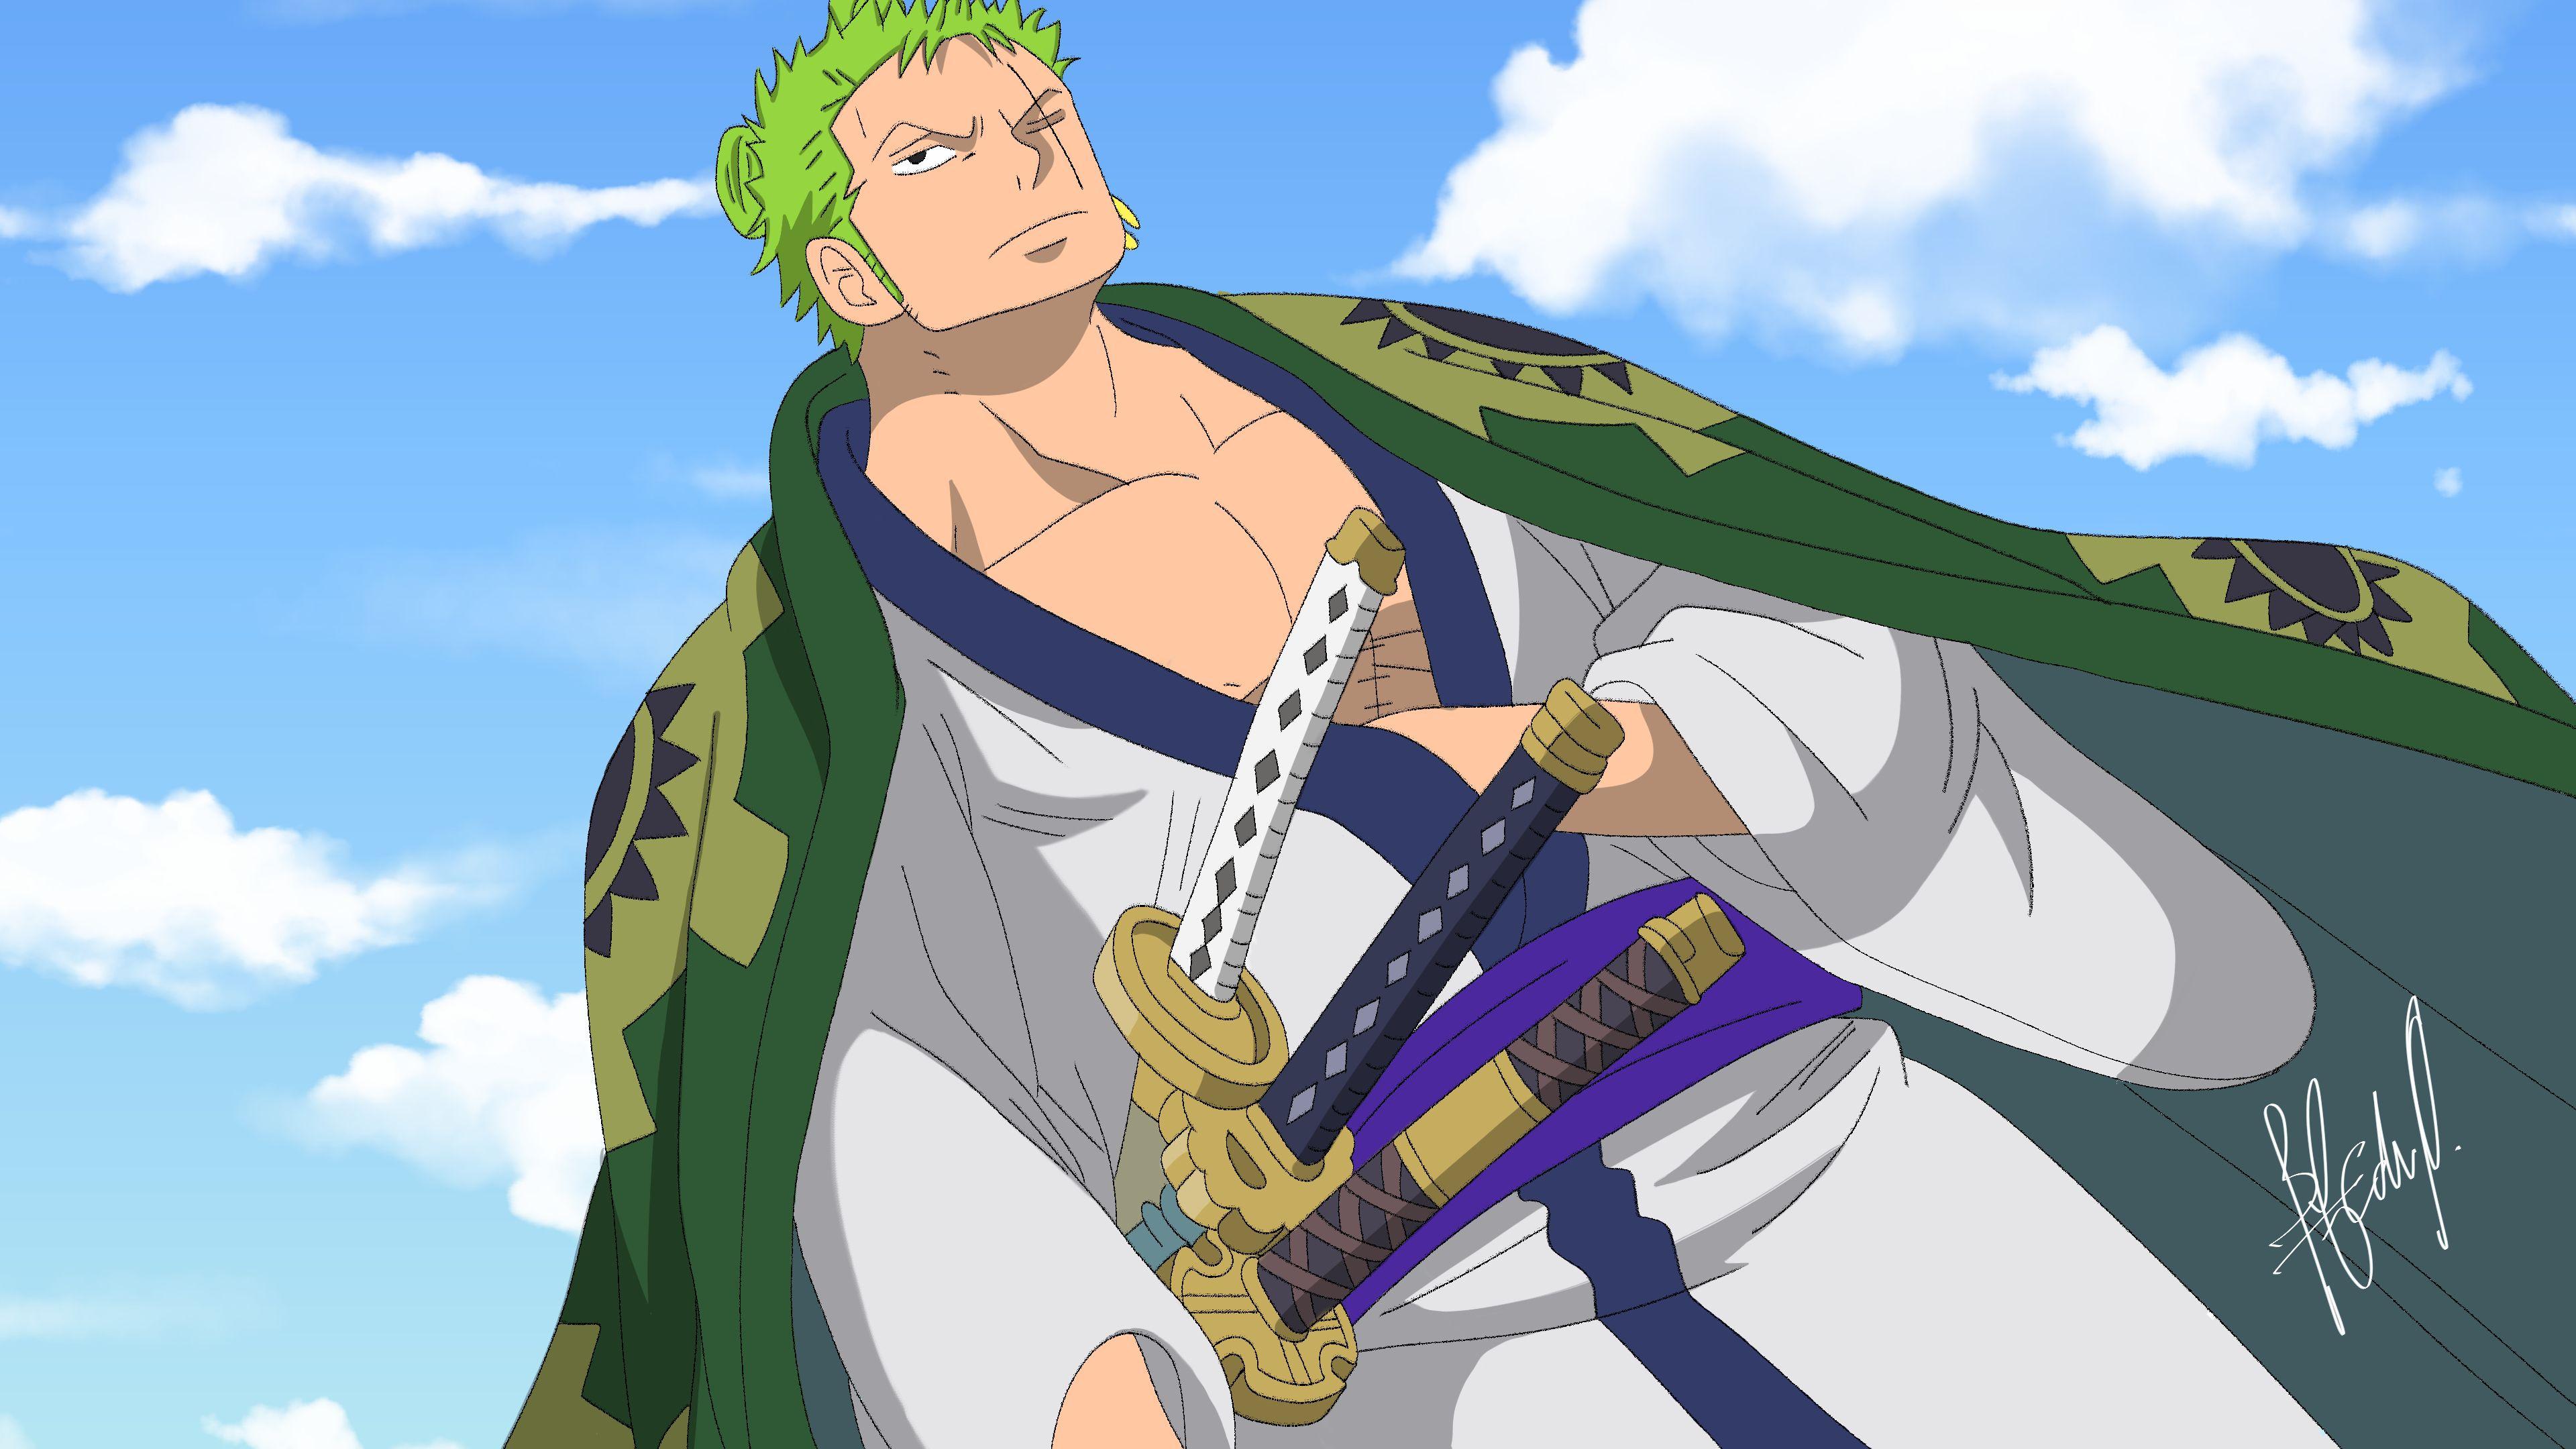 Zoro 4k Wallpaper For Pc Download All 4k Wallpapers And Use Them Even